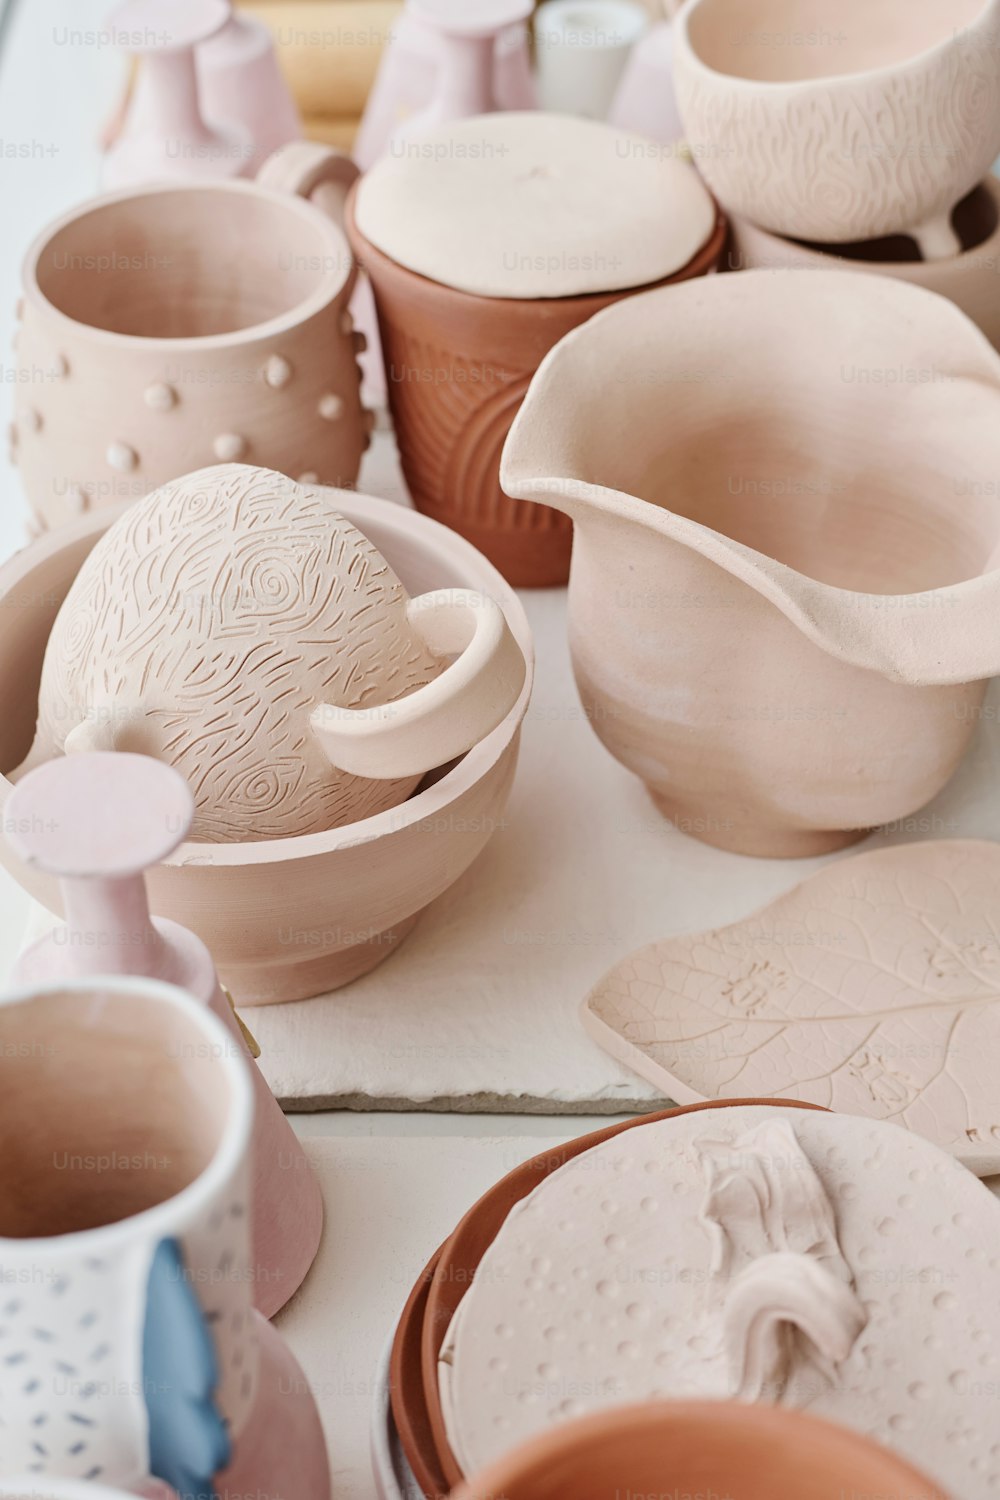 Assortment of handmade earthenware such as bowls, cups, mugs, jugs, pots and other kinds of clay items on display or table in workshop